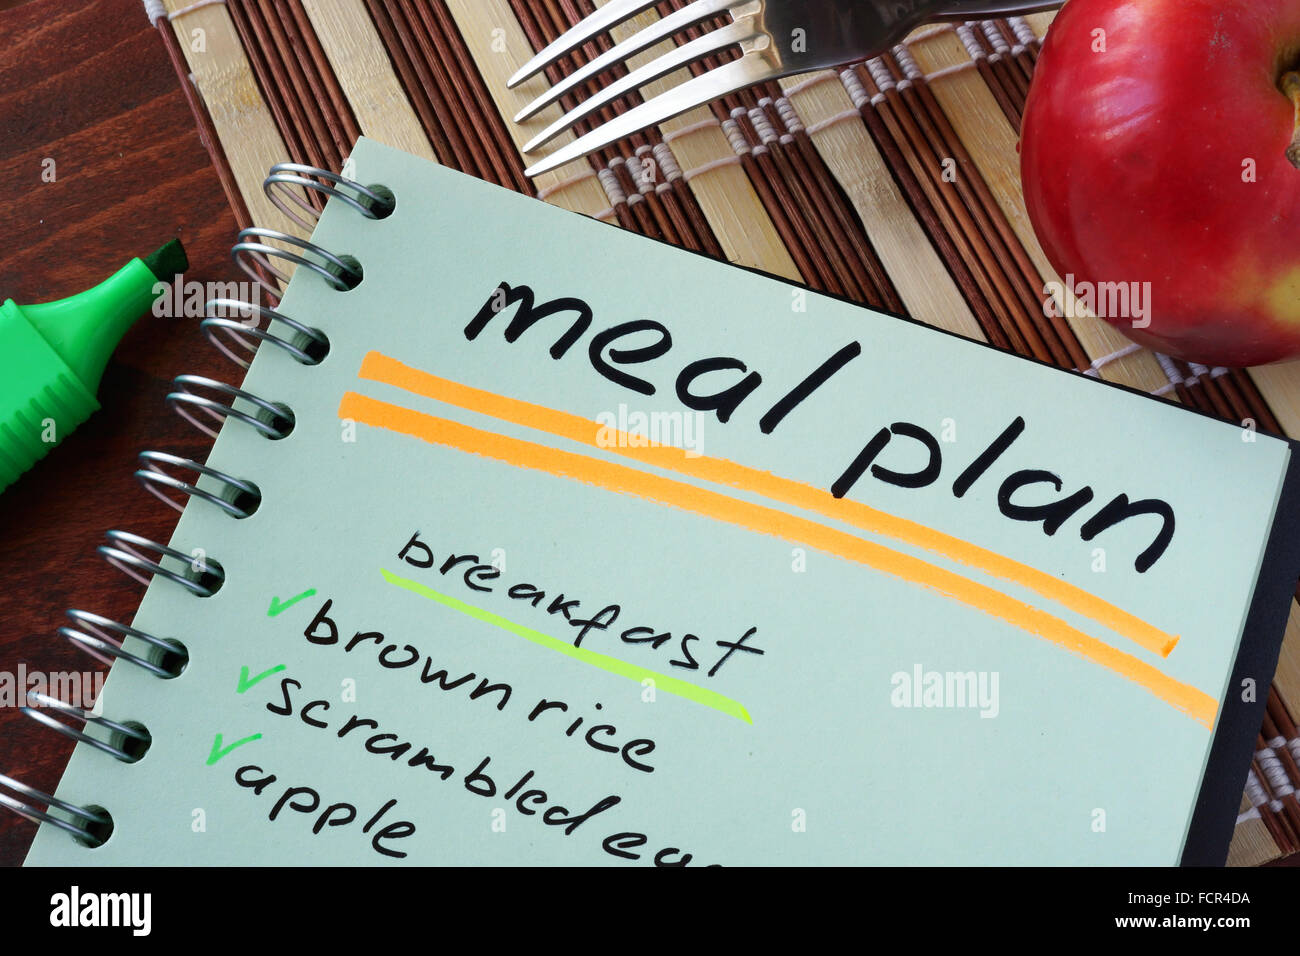 Notepad with meal plan and apple. Diet planning. Stock Photo